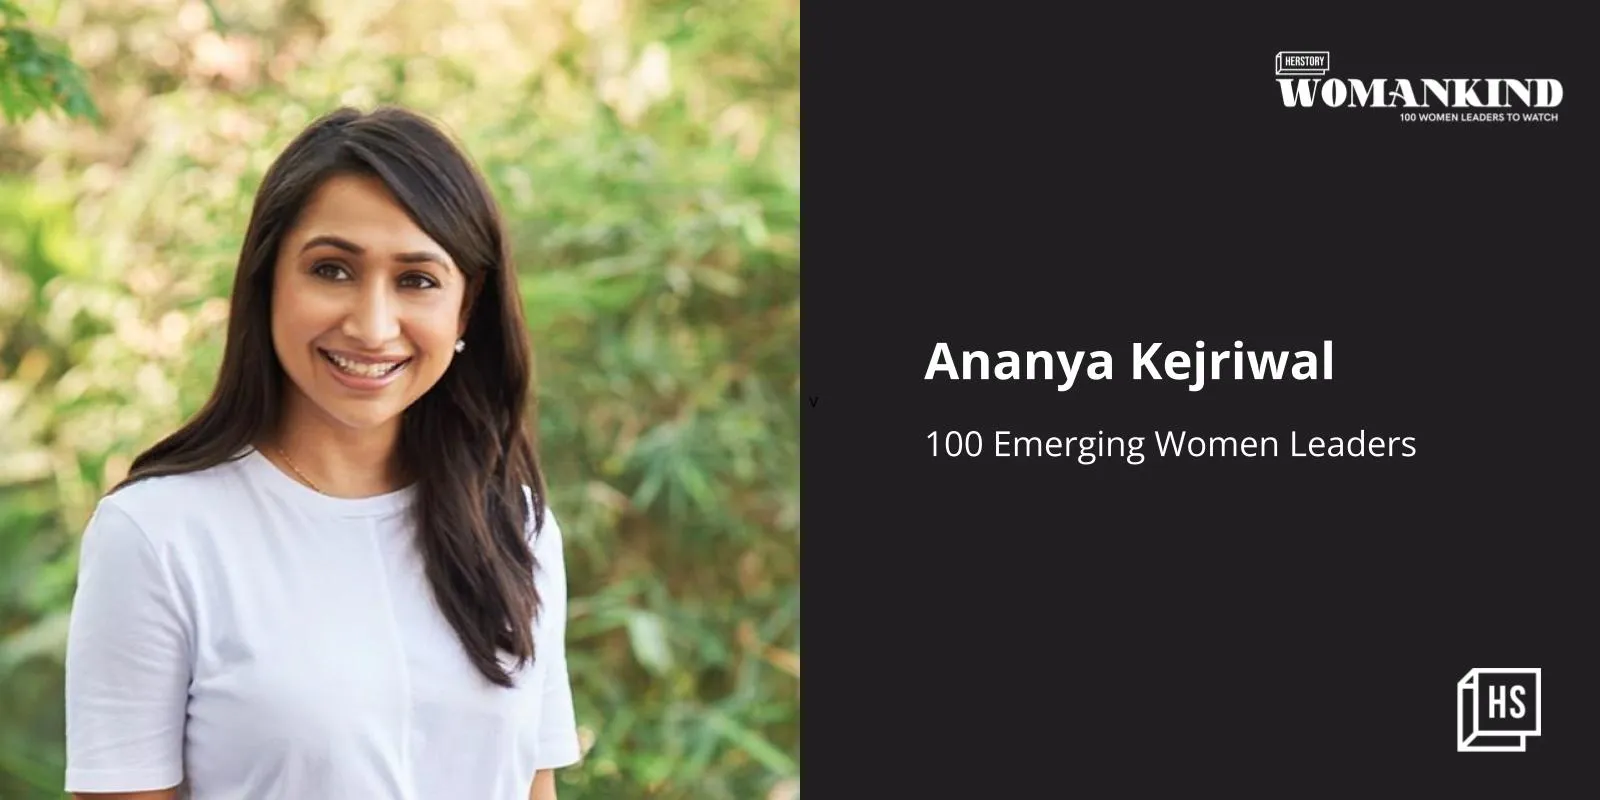 [100 Emerging Women Leaders] This techie-turned-entrepreneur is building a nutritional startup for women